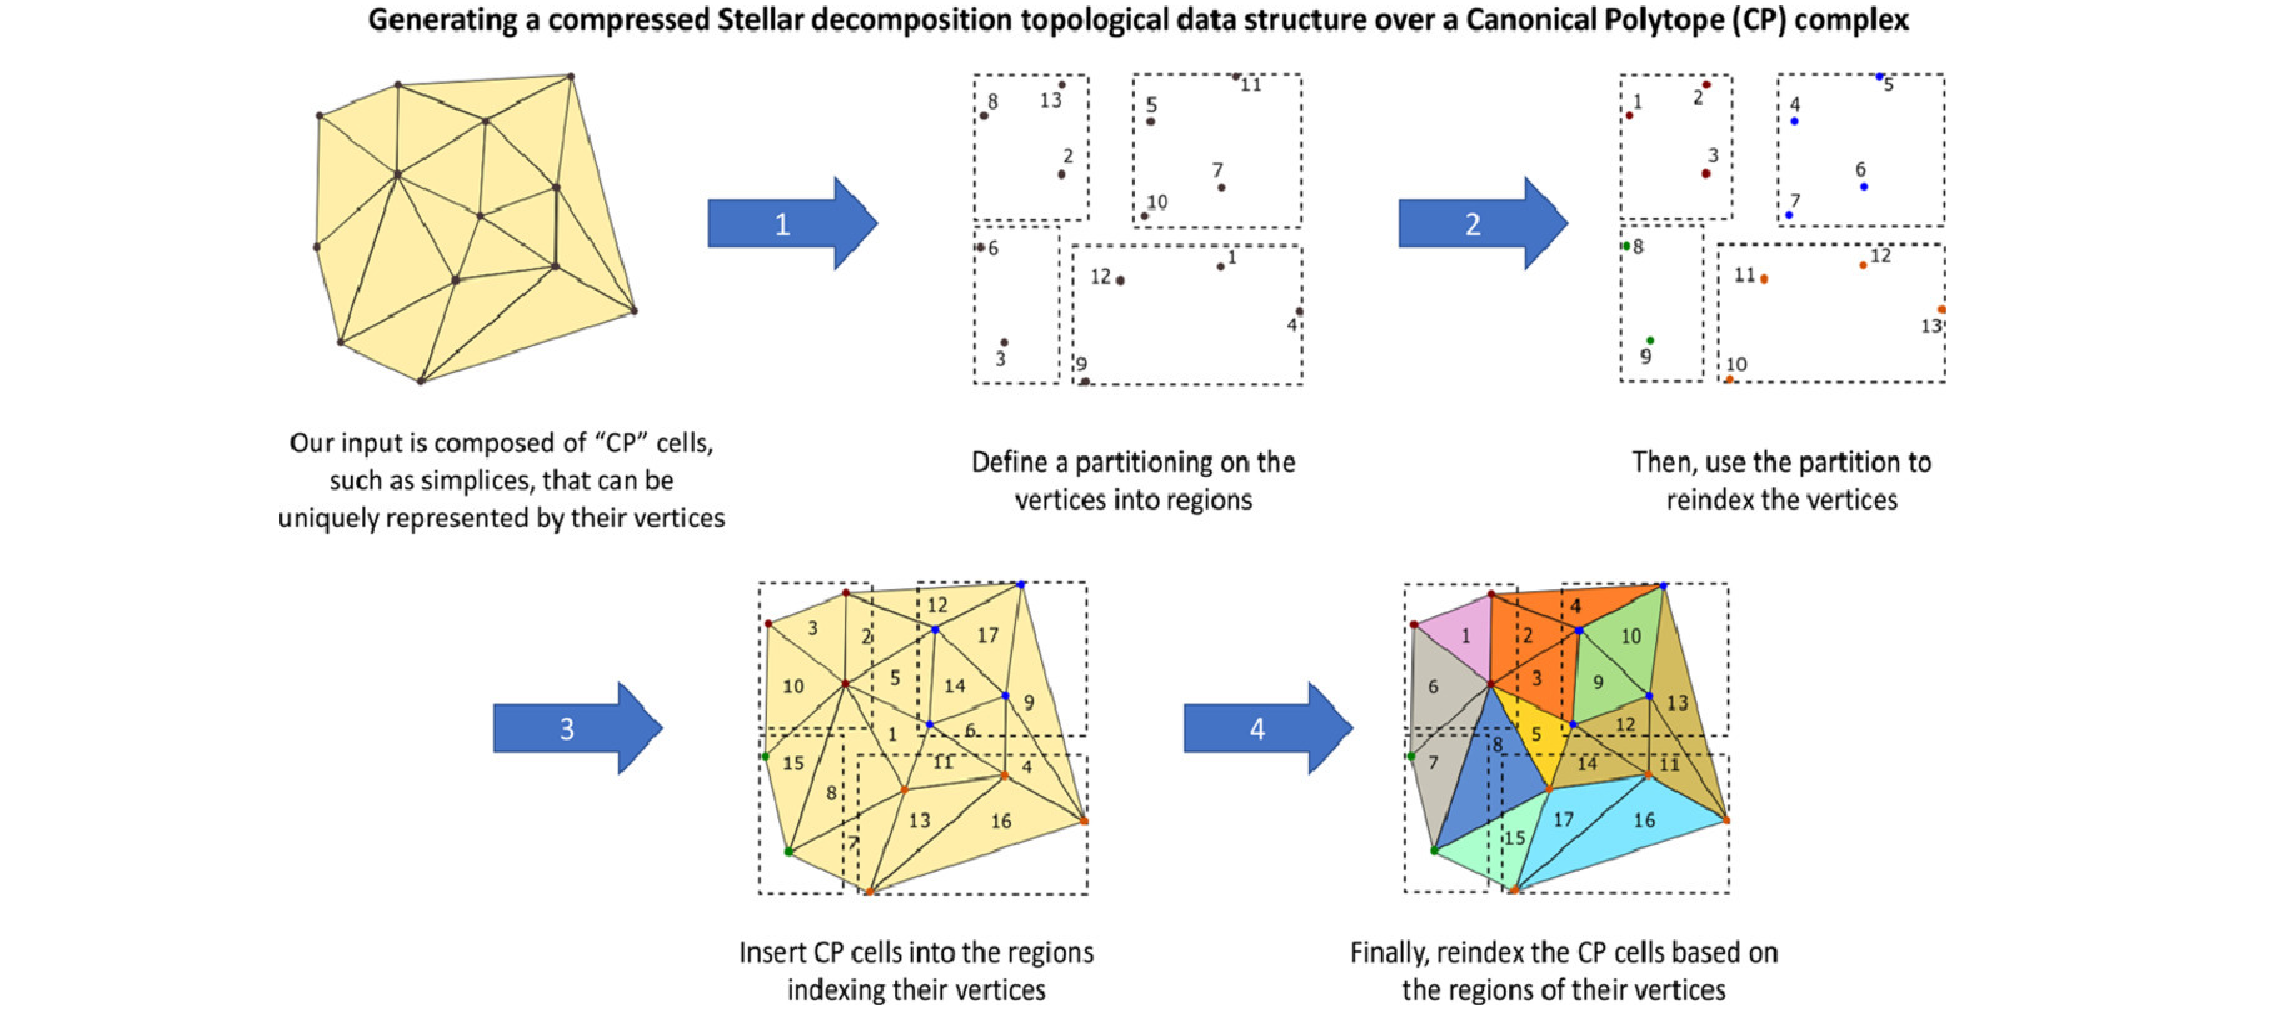 The Stellar decomposition: A compact representation for simplicial complexes and beyond